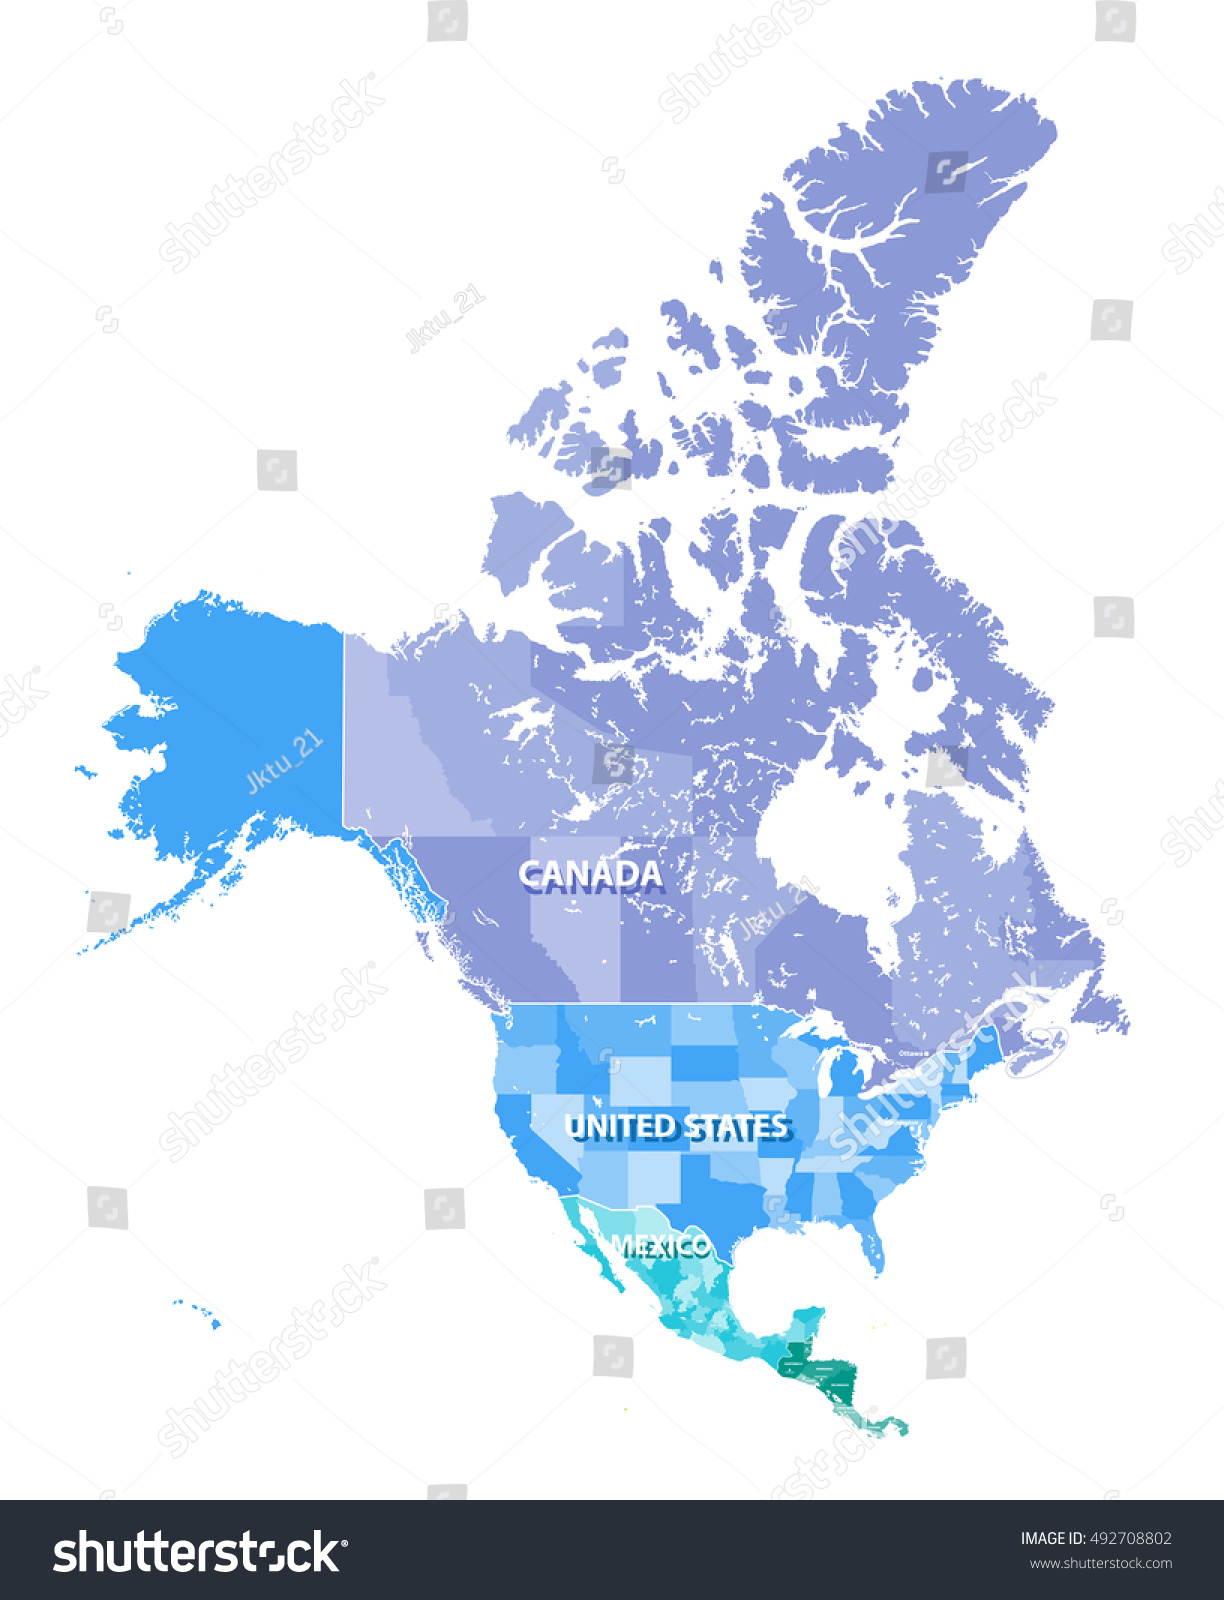 North America High Detailed Vector Map Stock Vector Royalty Free